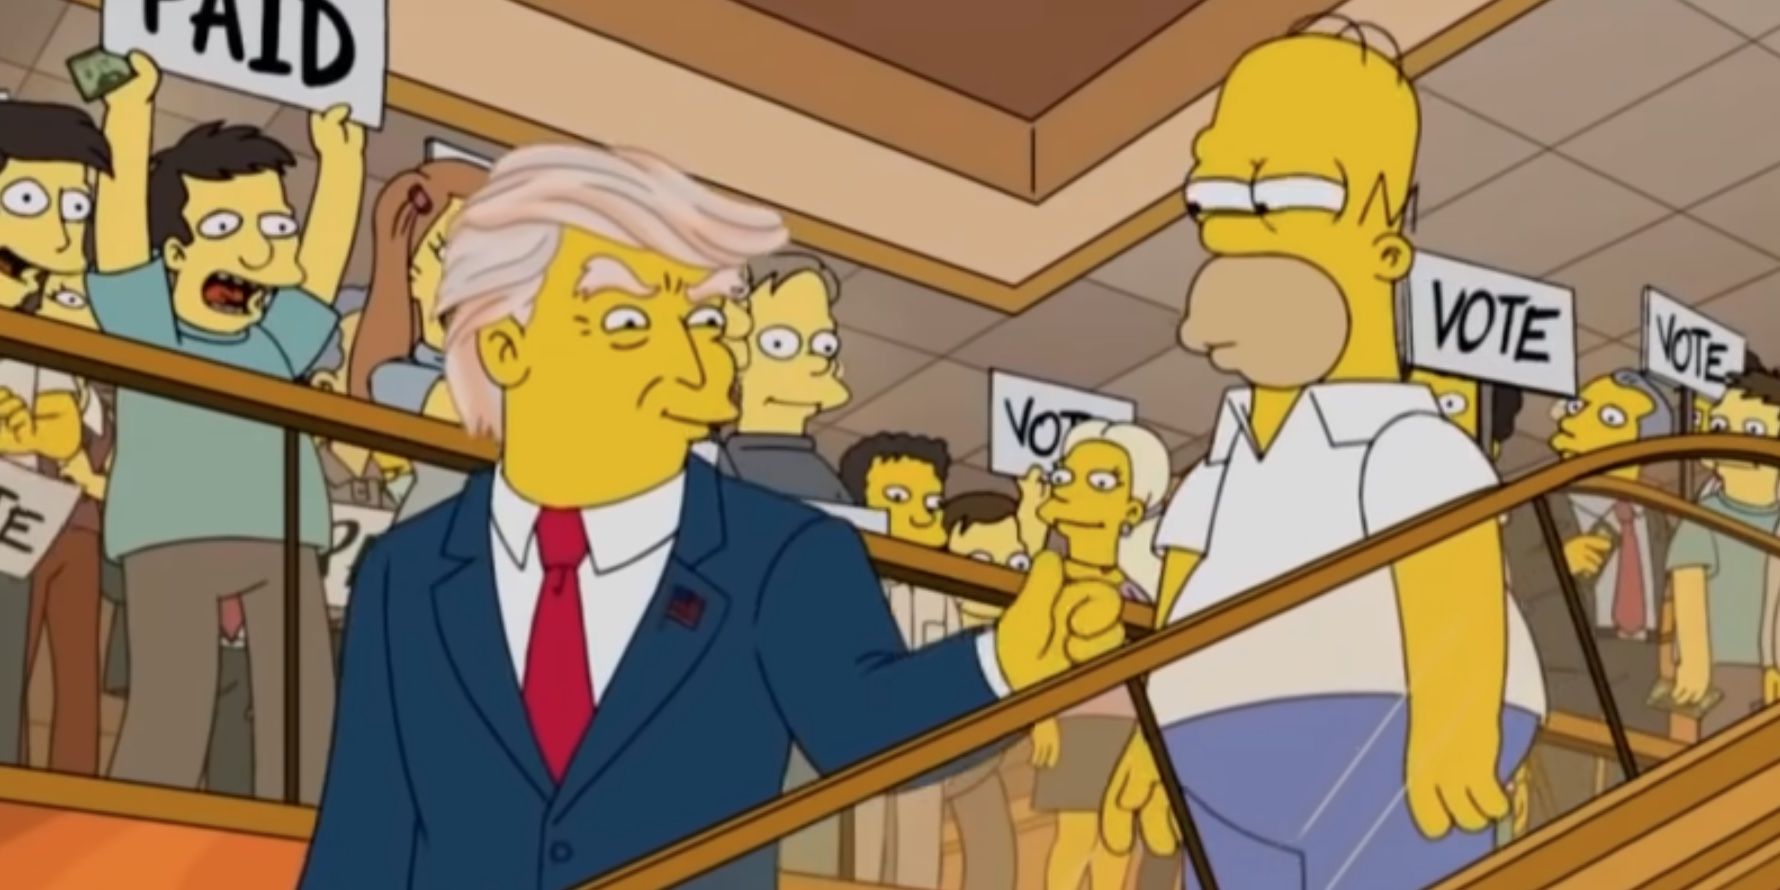 Donald Trump and Homer Simpson (voiced by Dan Castellaneta) in 'The Simpsons'